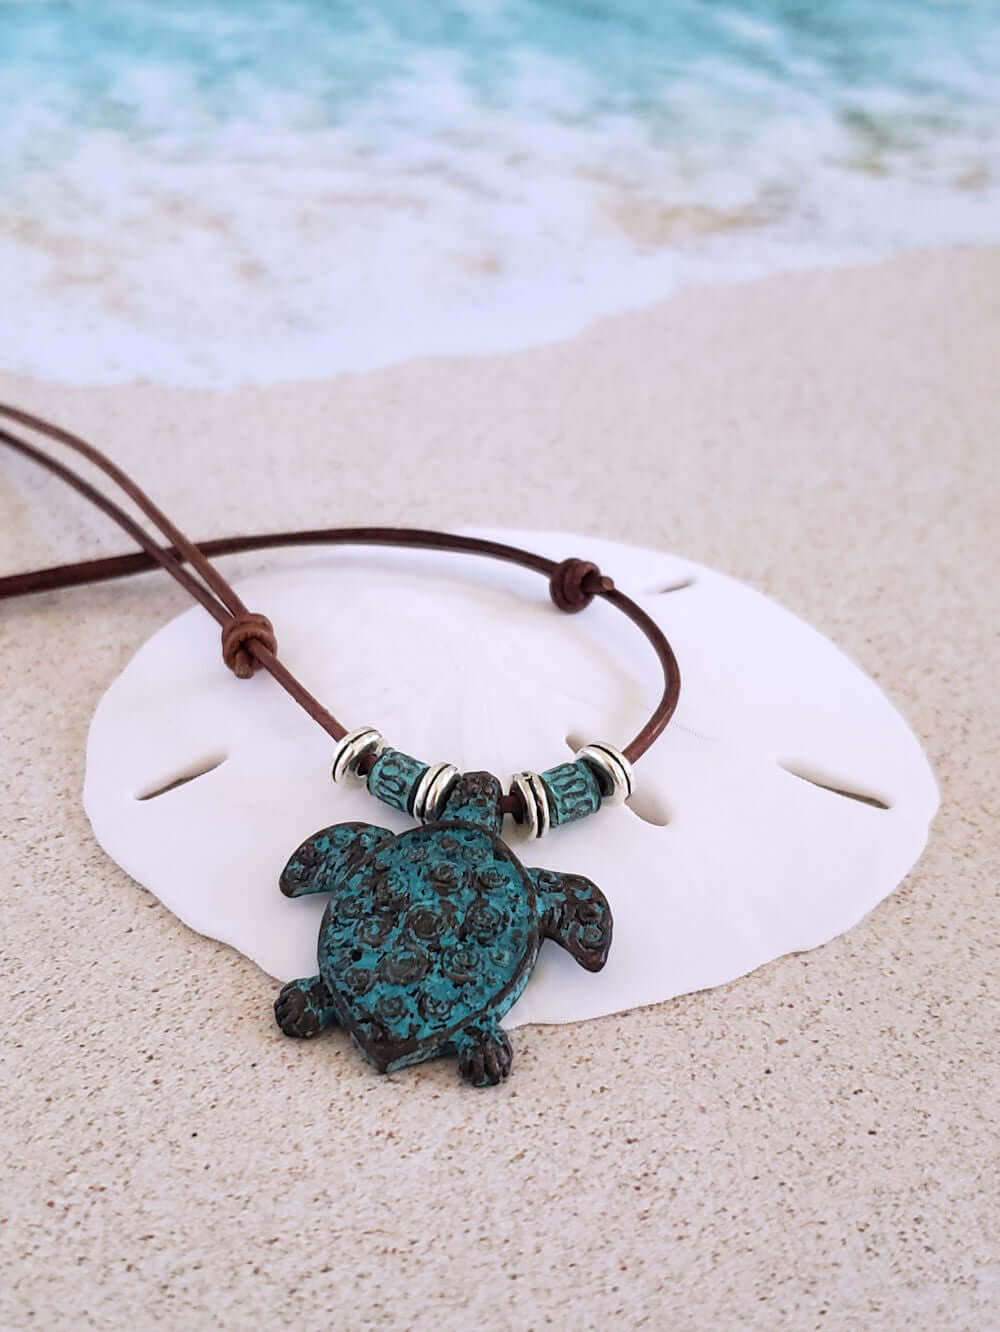 Beachy Jewelry Collection - Turtles, Seahorses, Sea Shells combined with Pearls, Gemstones and Leather.